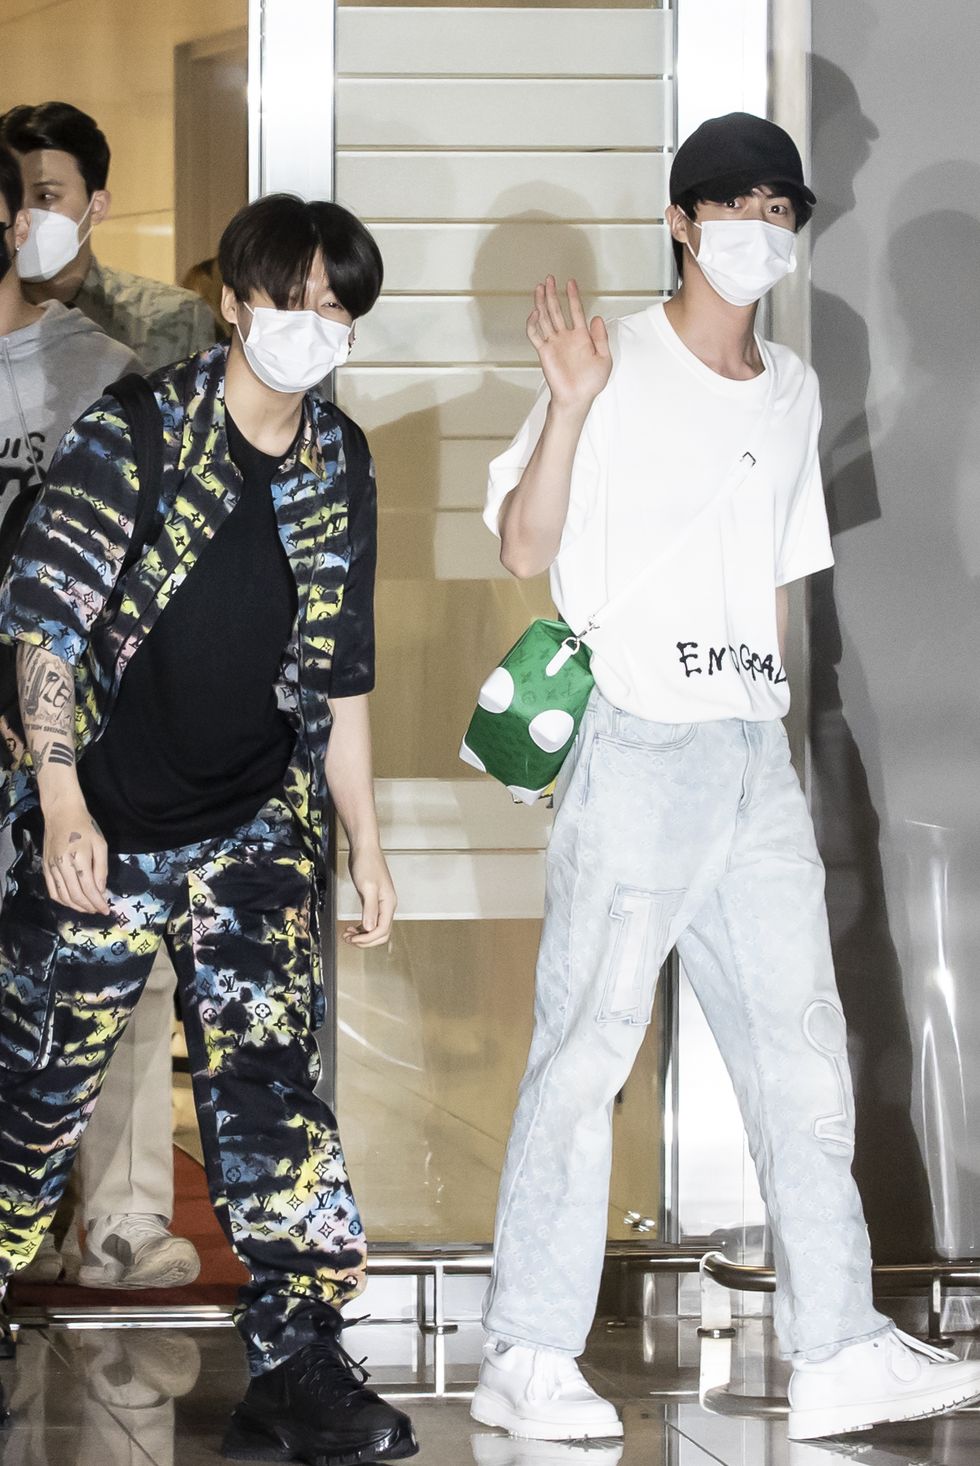 bts heads to new york
members of the k pop group bts prepare to leave for new york from incheon international airport , west of seoul, on sept 18, 2021, to attend a united nations event as special presidential envoys for future generations and culture yonhap2021 09 18 205906
copyright ⓒ 1980 2021 yonhapnews agency all rights reserved